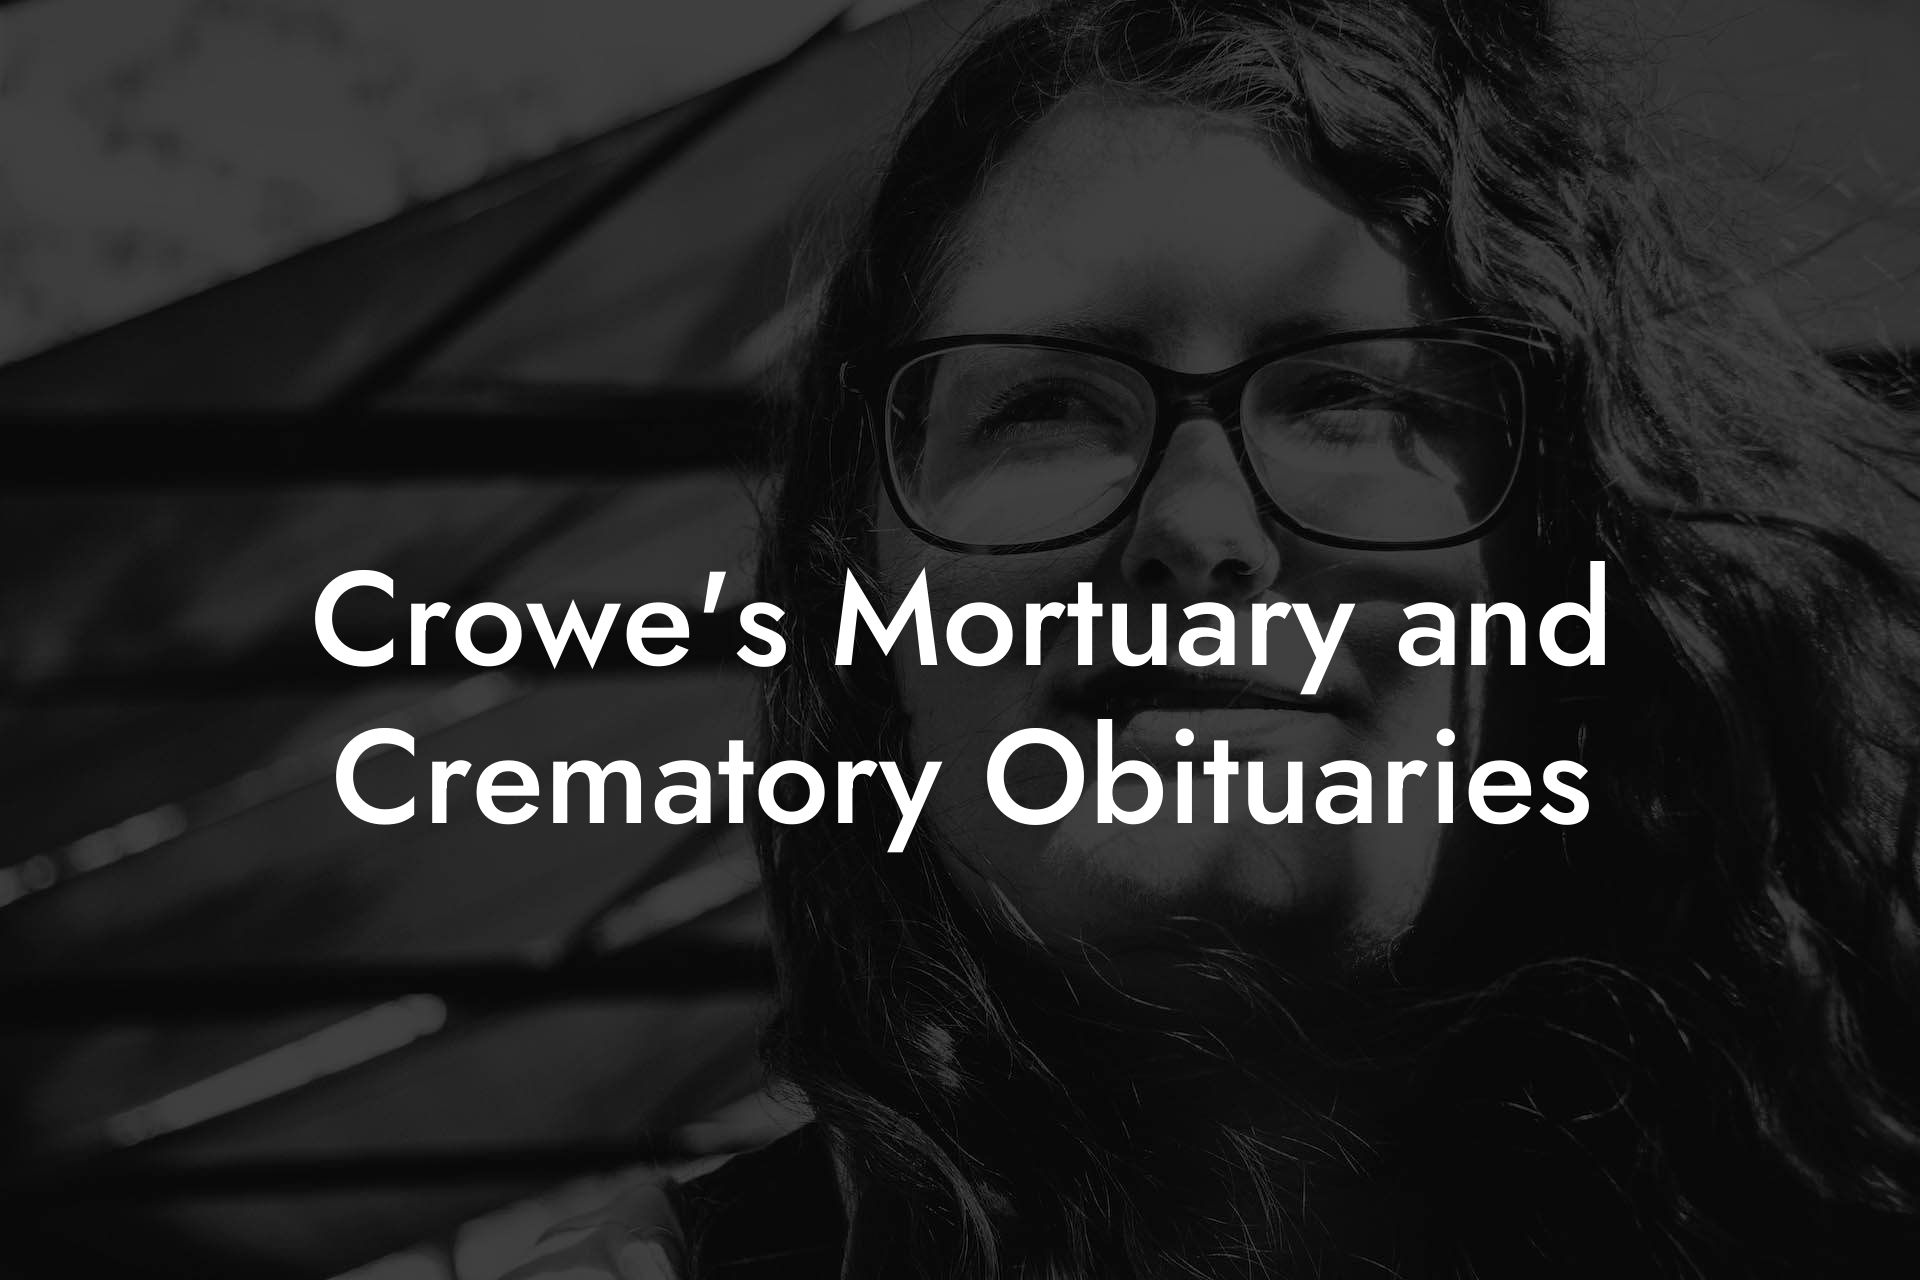 Crowe's Mortuary and Crematory Obituaries